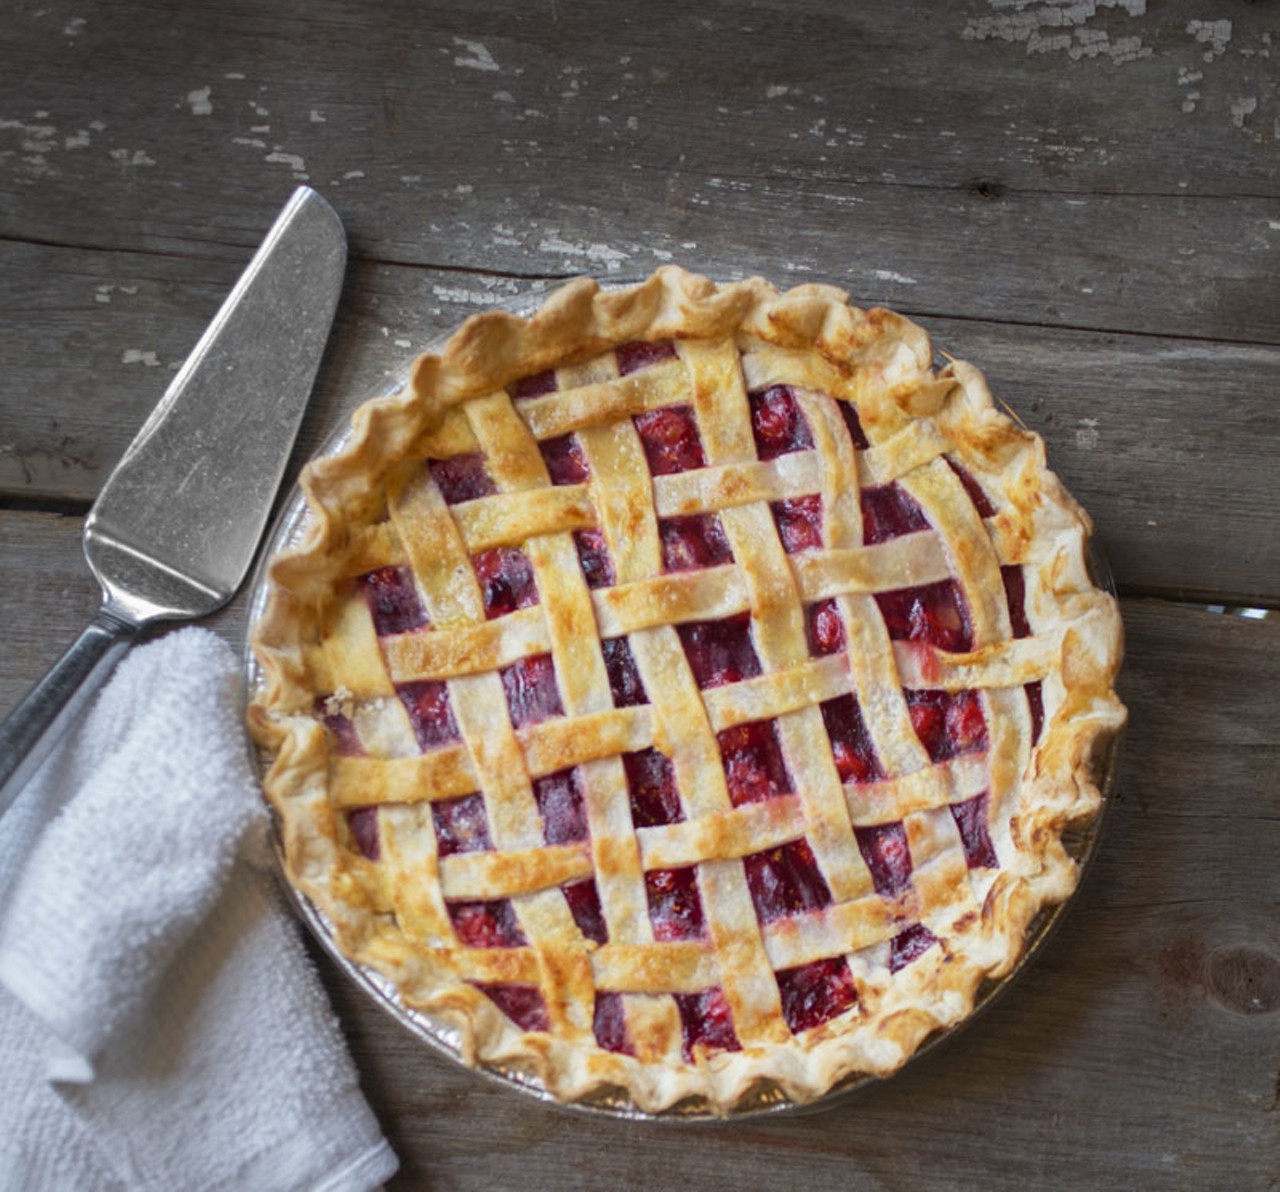 The cherry-lattice pie, a seasonal special at the Dam.